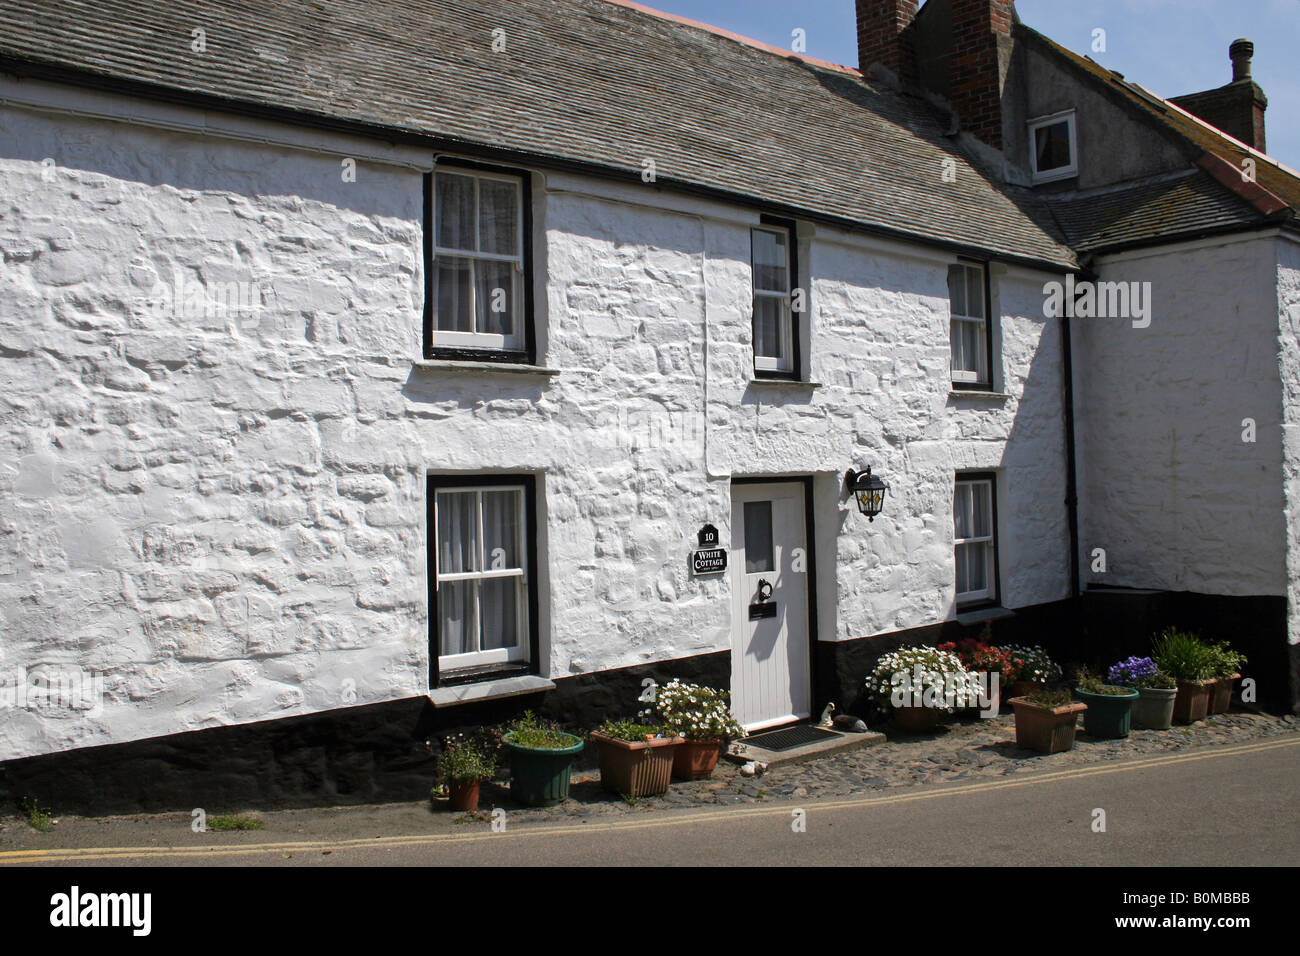 A Traditional Cornish Cottage In The Village Of Mousehole